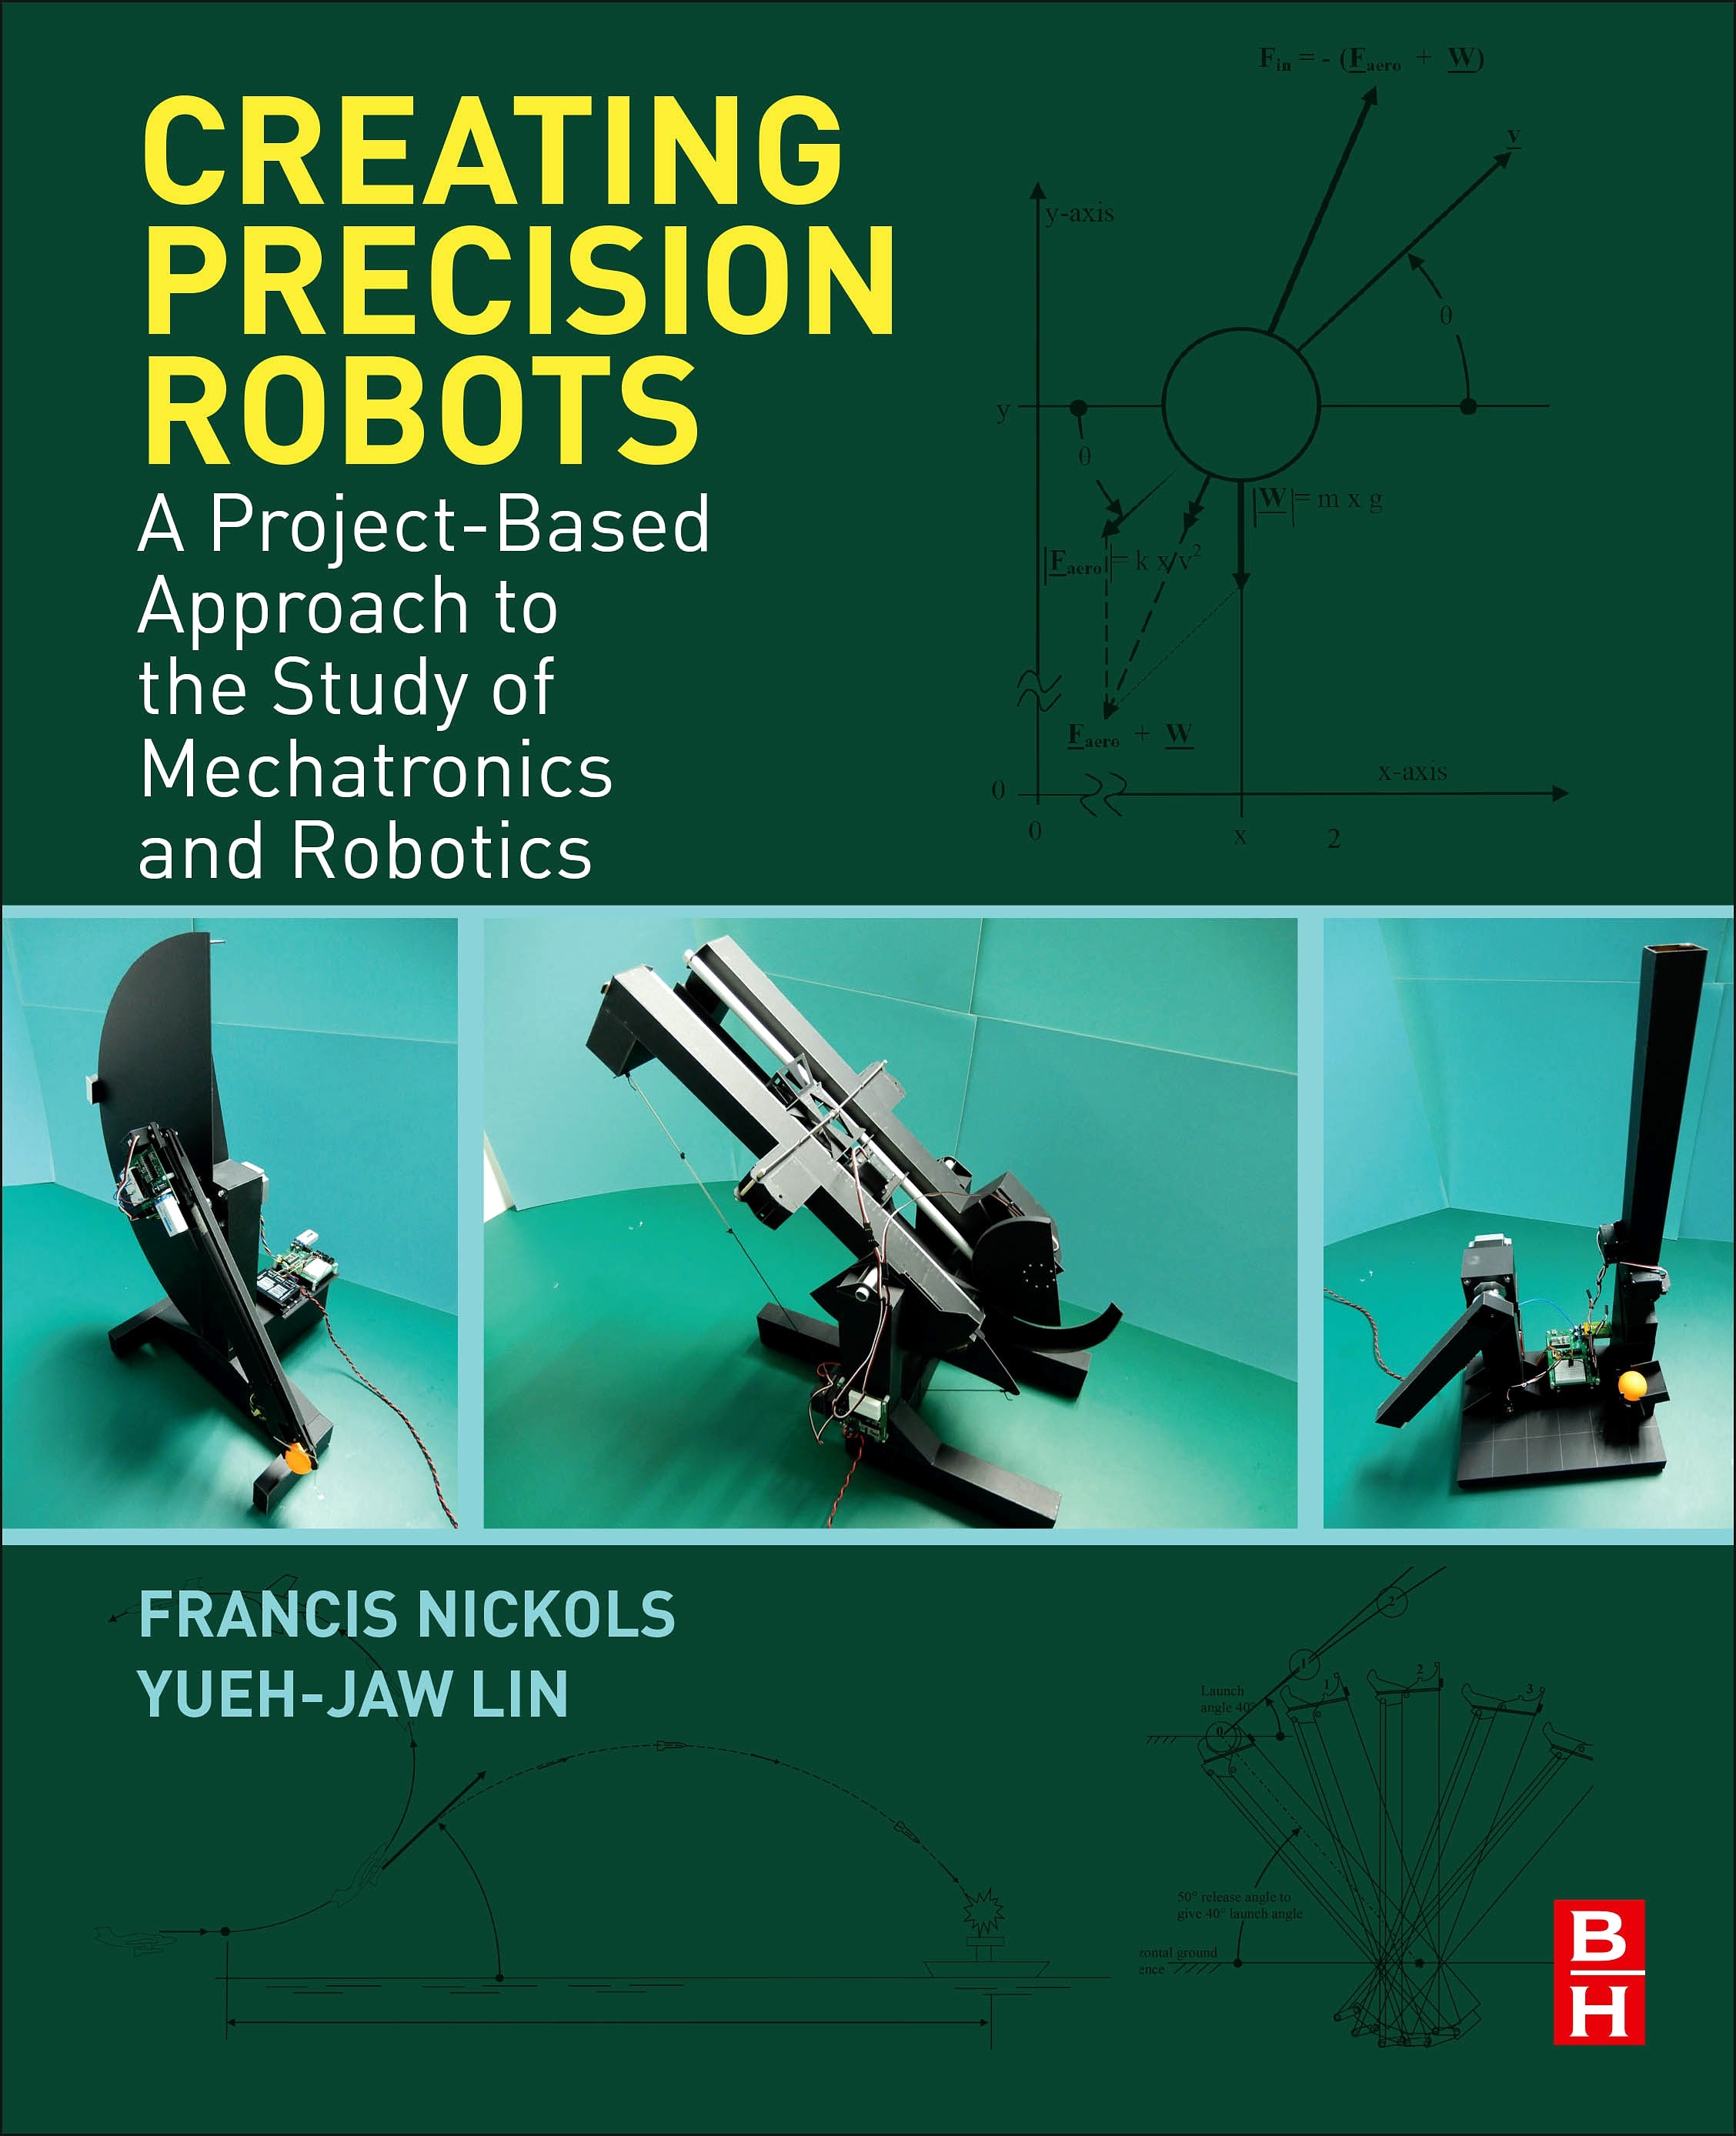 creating precision robots a project-based approach to the study of mechatronics and robotics 1st edition yueh